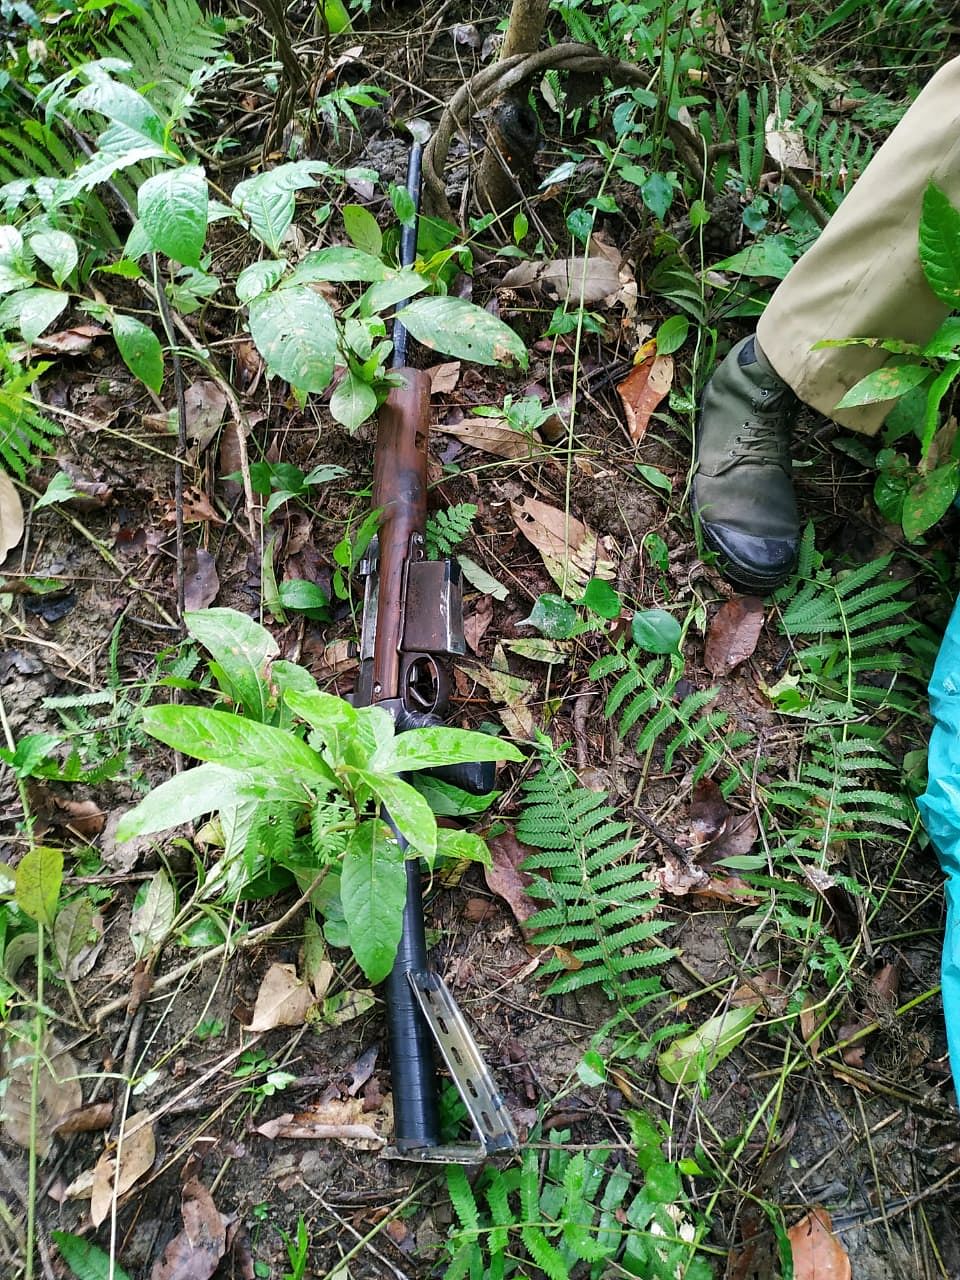 A rifle seized from the suspected poacher killed in Orang National Park in Assam. (DH photo)